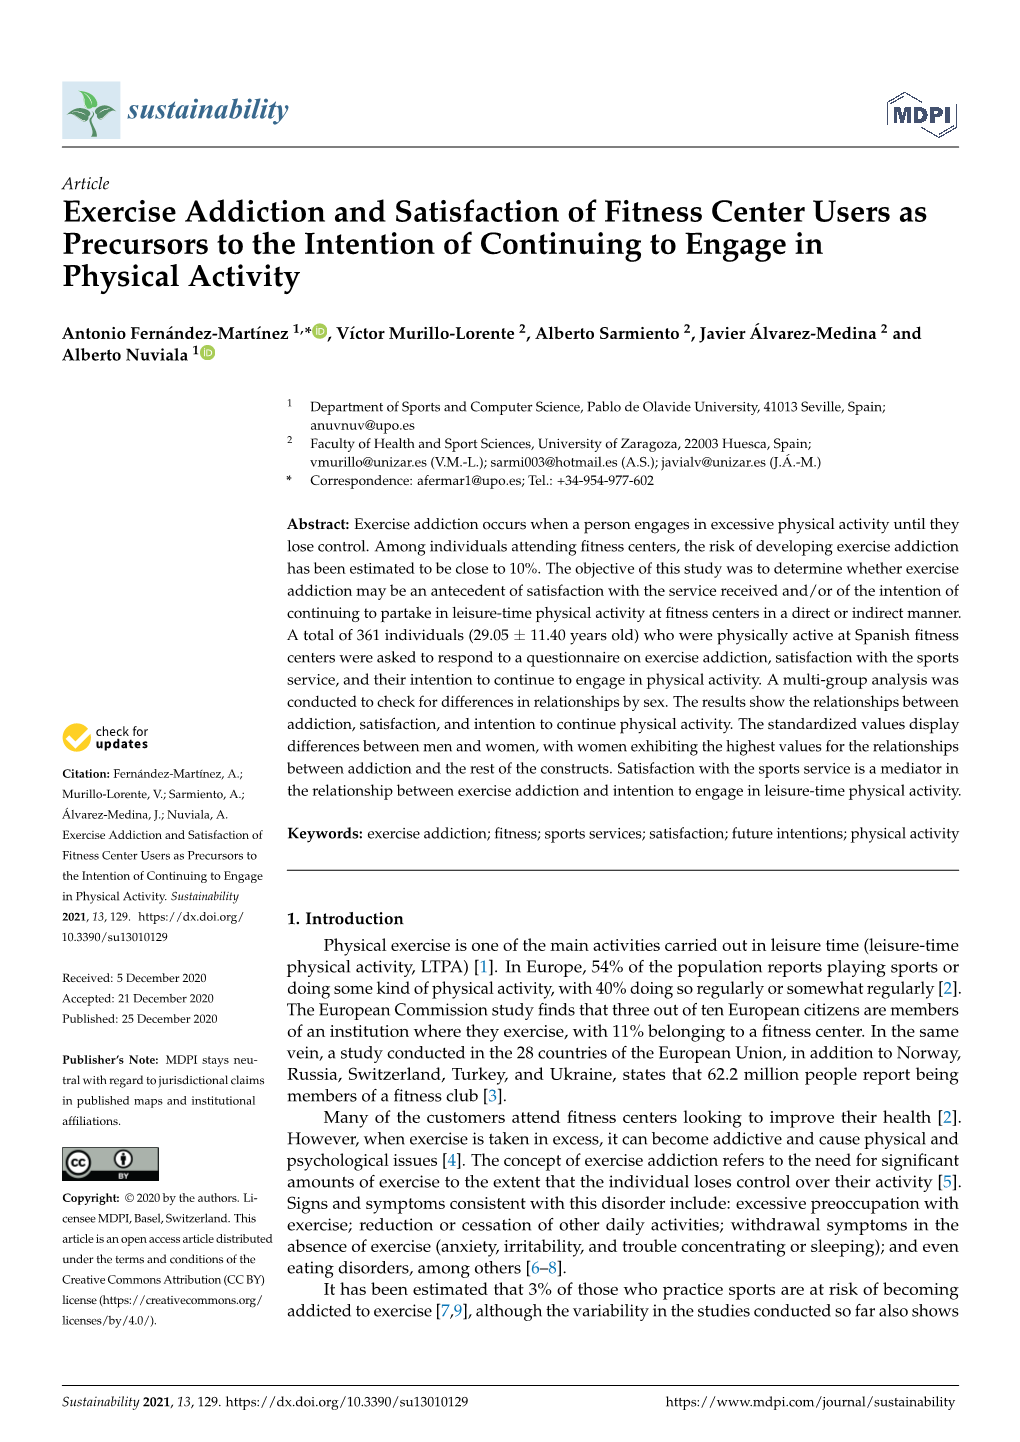 Exercise Addiction and Satisfaction of Fitness Center Users As Precursors to the Intention of Continuing to Engage in Physical Activity